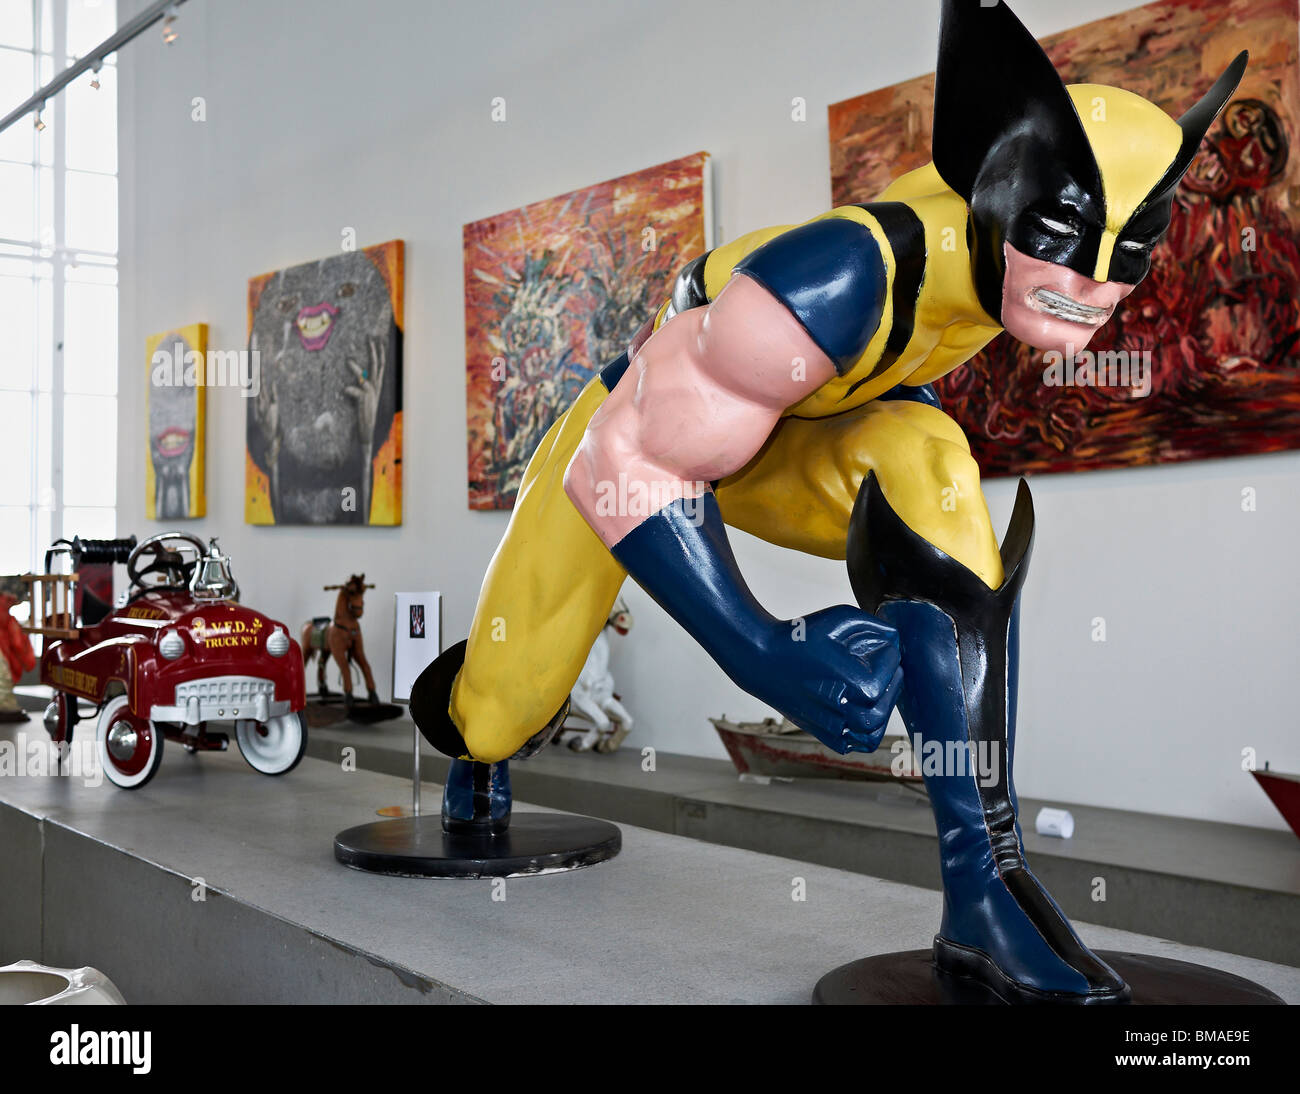 Super hero model based on the X-Man Wolverine character Stock Photo